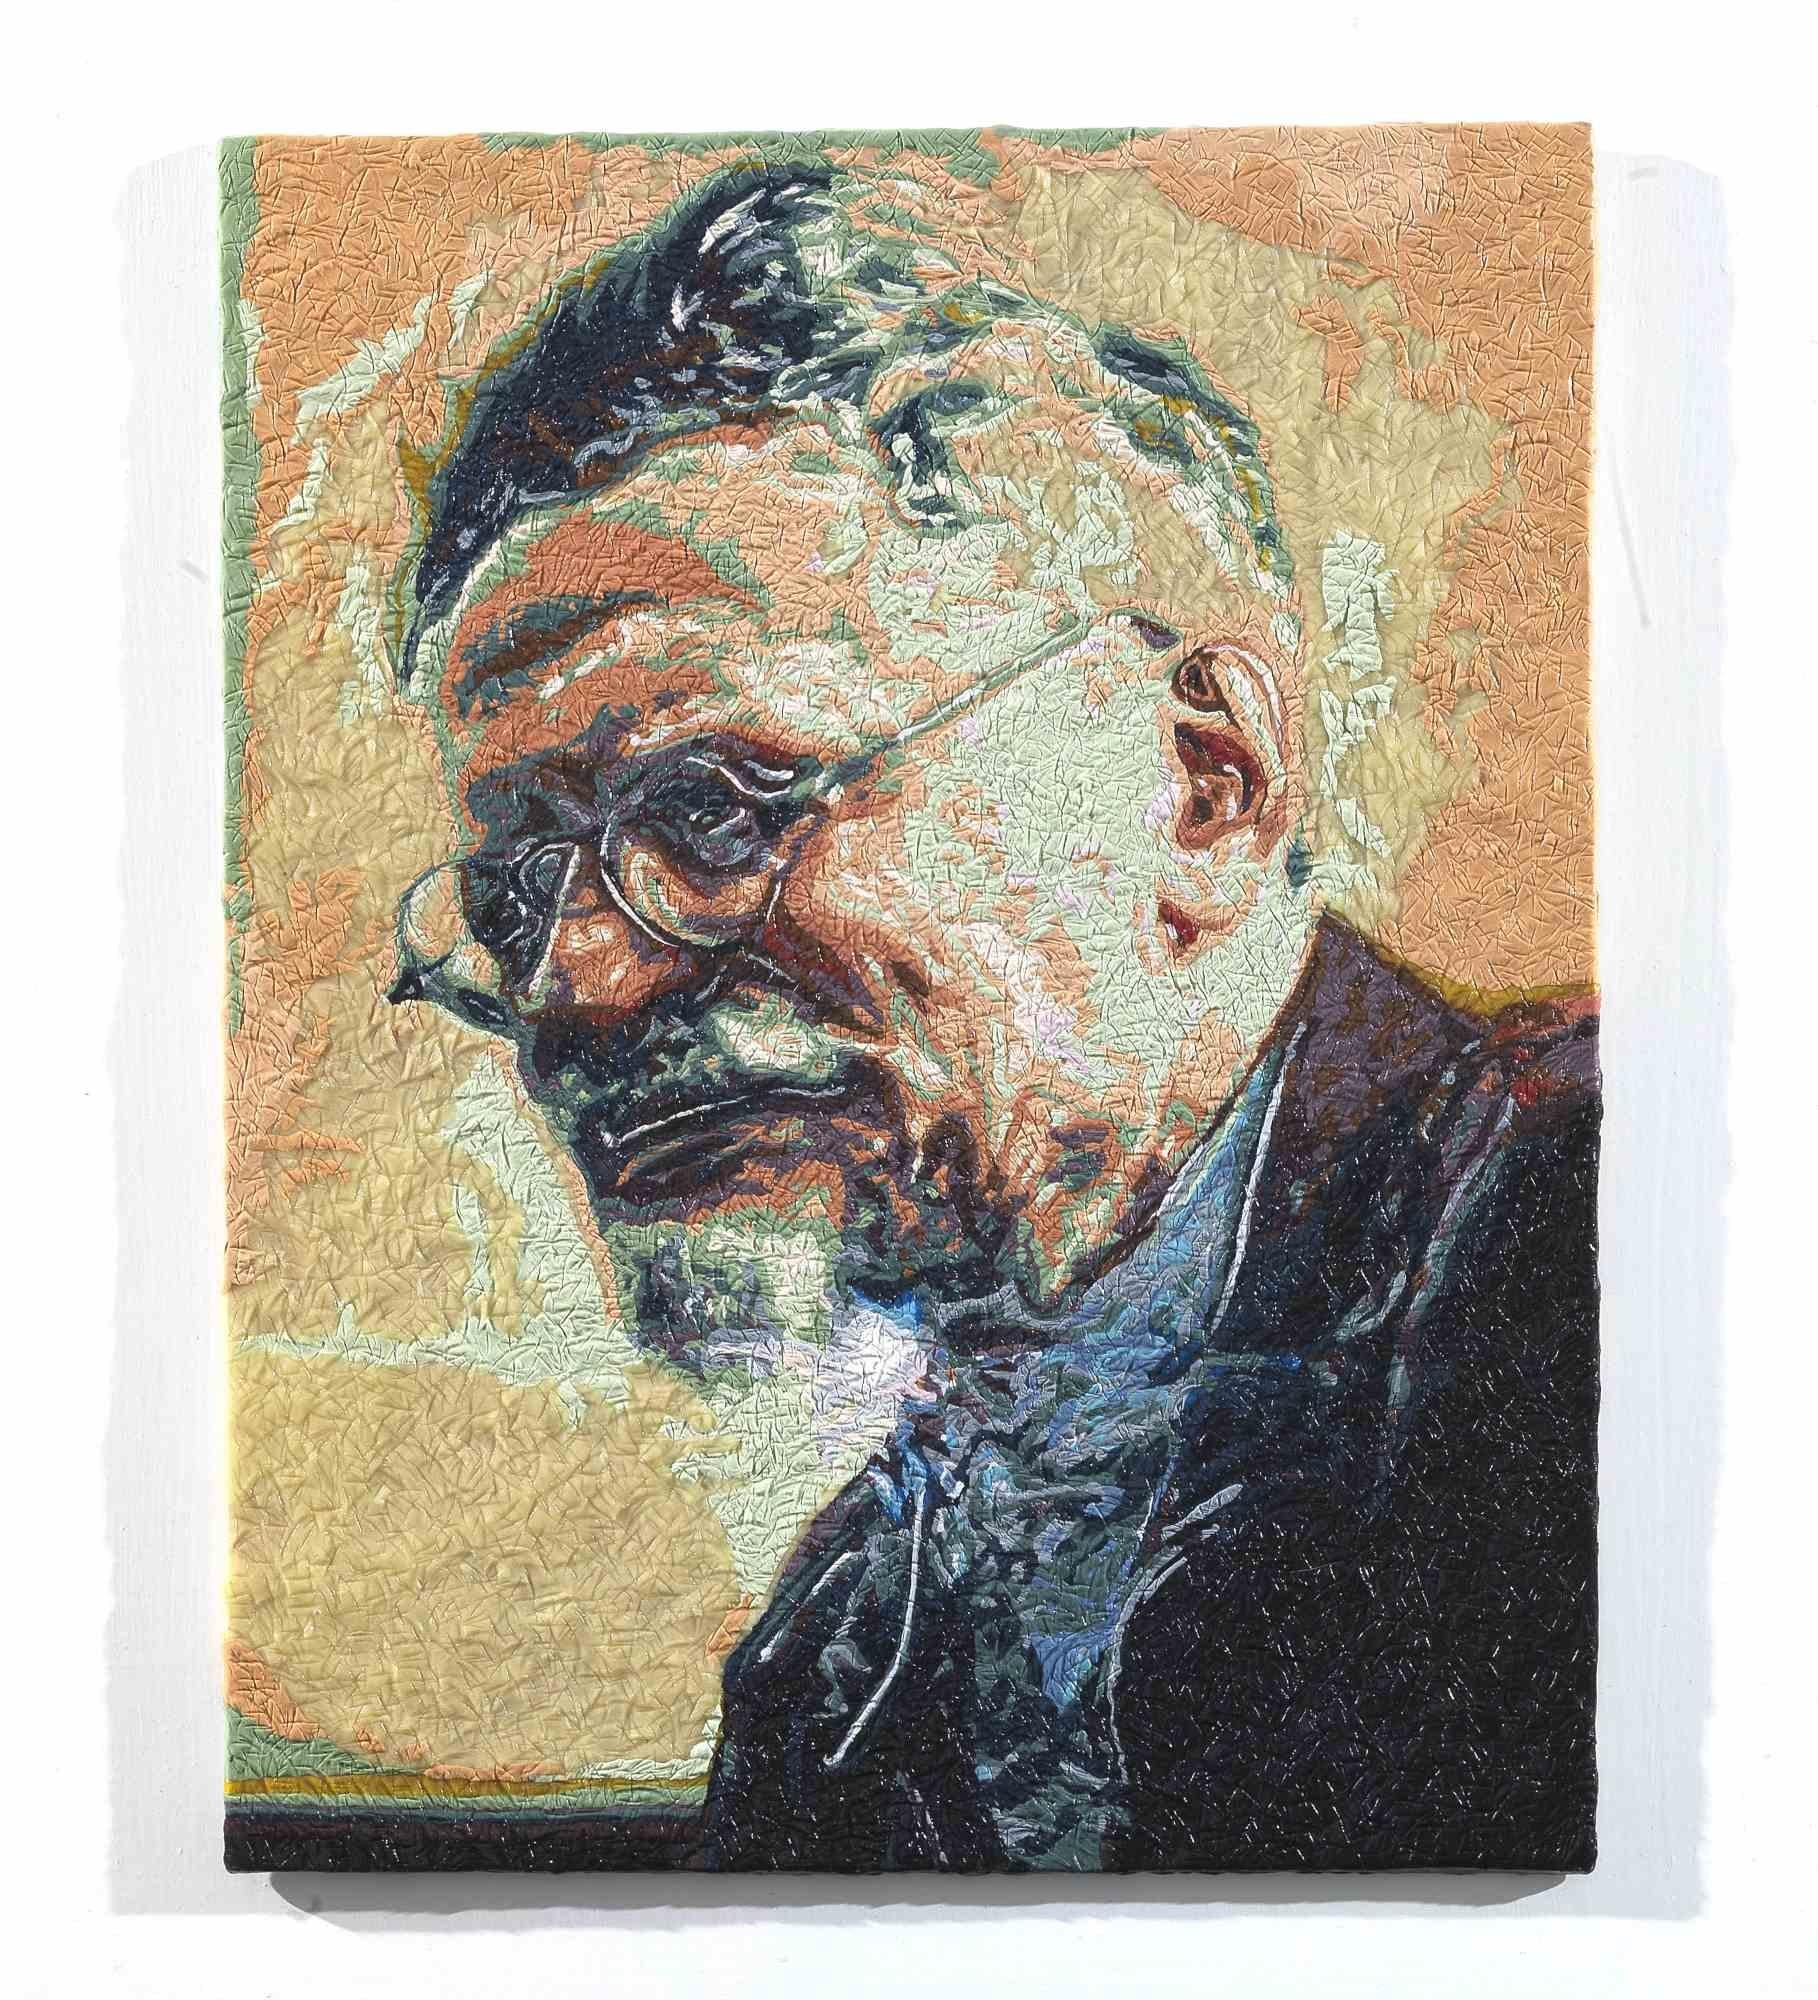 Trotsky is an original Contemporary Arwork realized by the Italian artist Maurizio Savini (b. Rome, 1962) in 2015. 

Original Encaustic of chewing gum on board. 

Hand-signed by the artist on the back of the canvas.

The Certificate of Authenticity